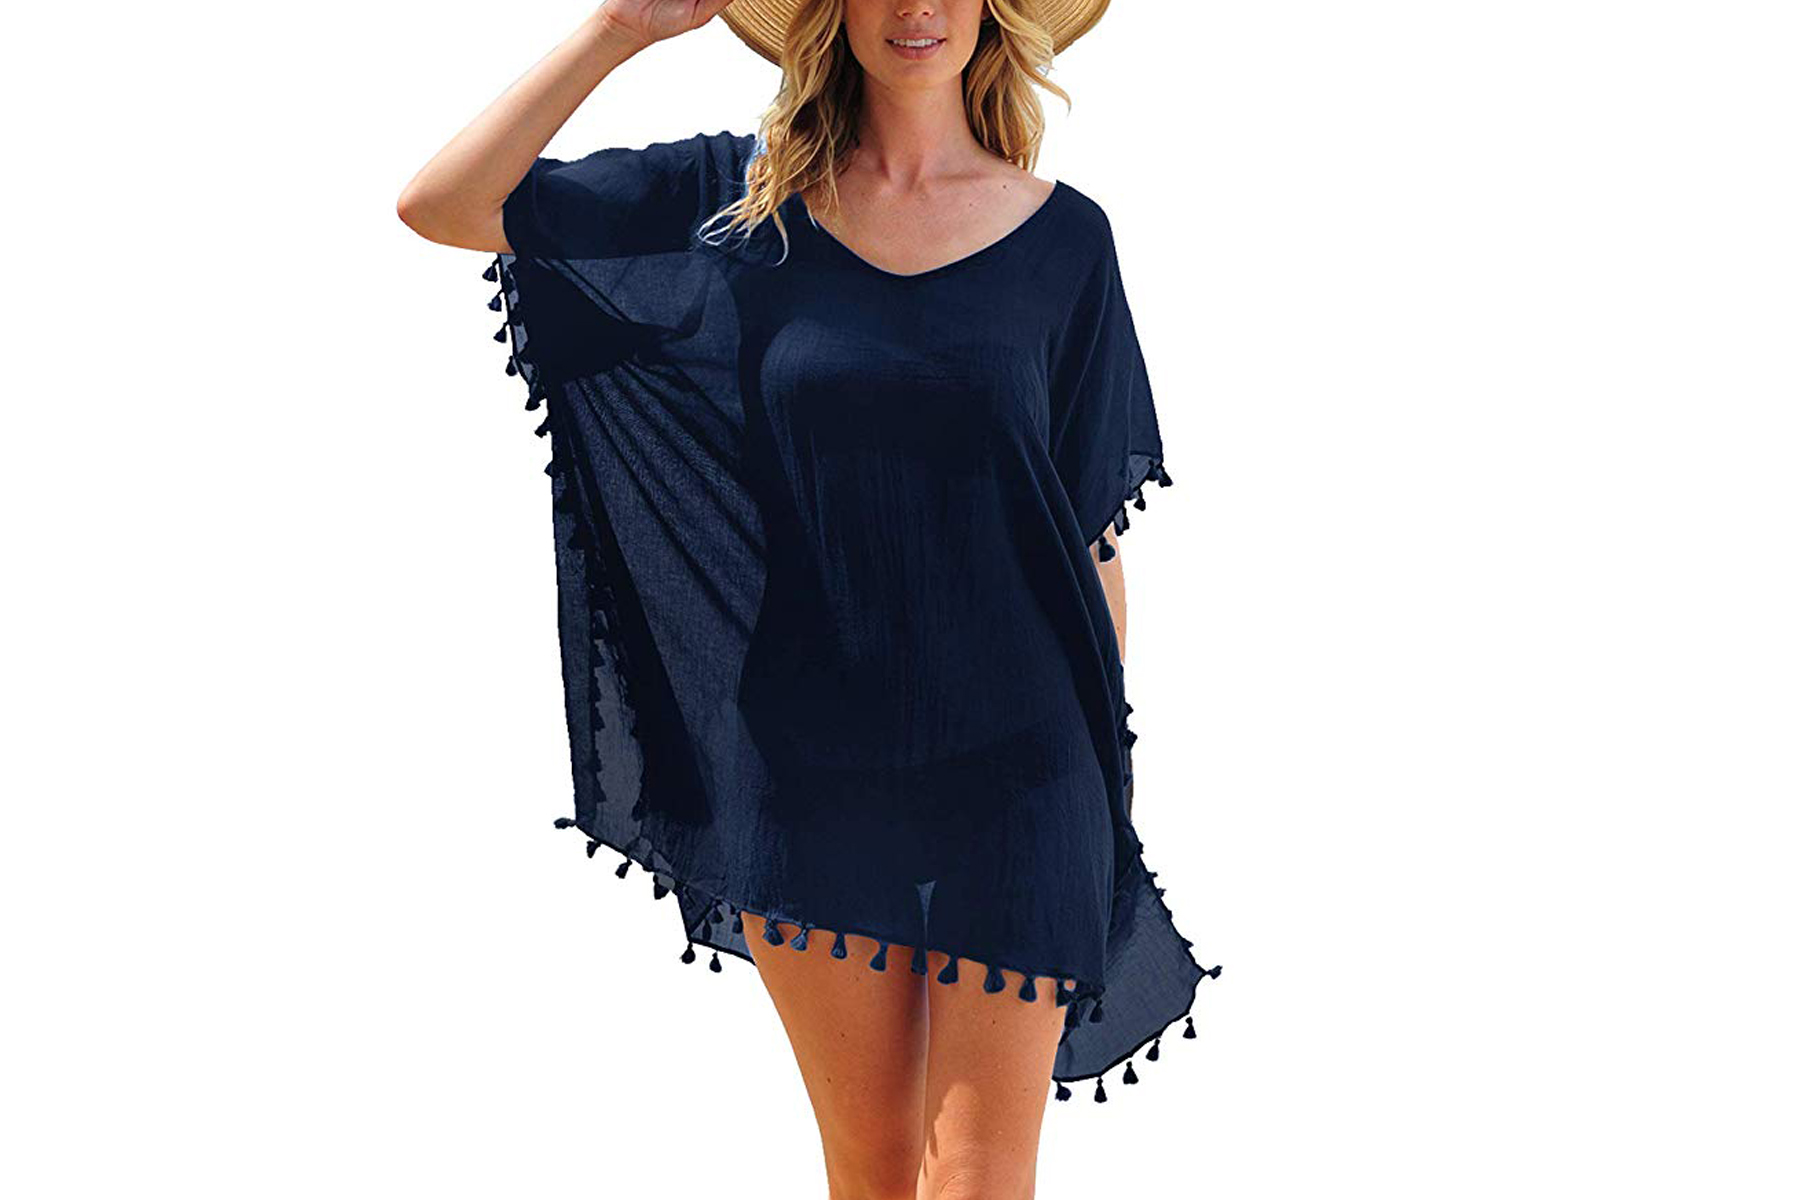 13 Best Beach Cover Ups For Women Over 50